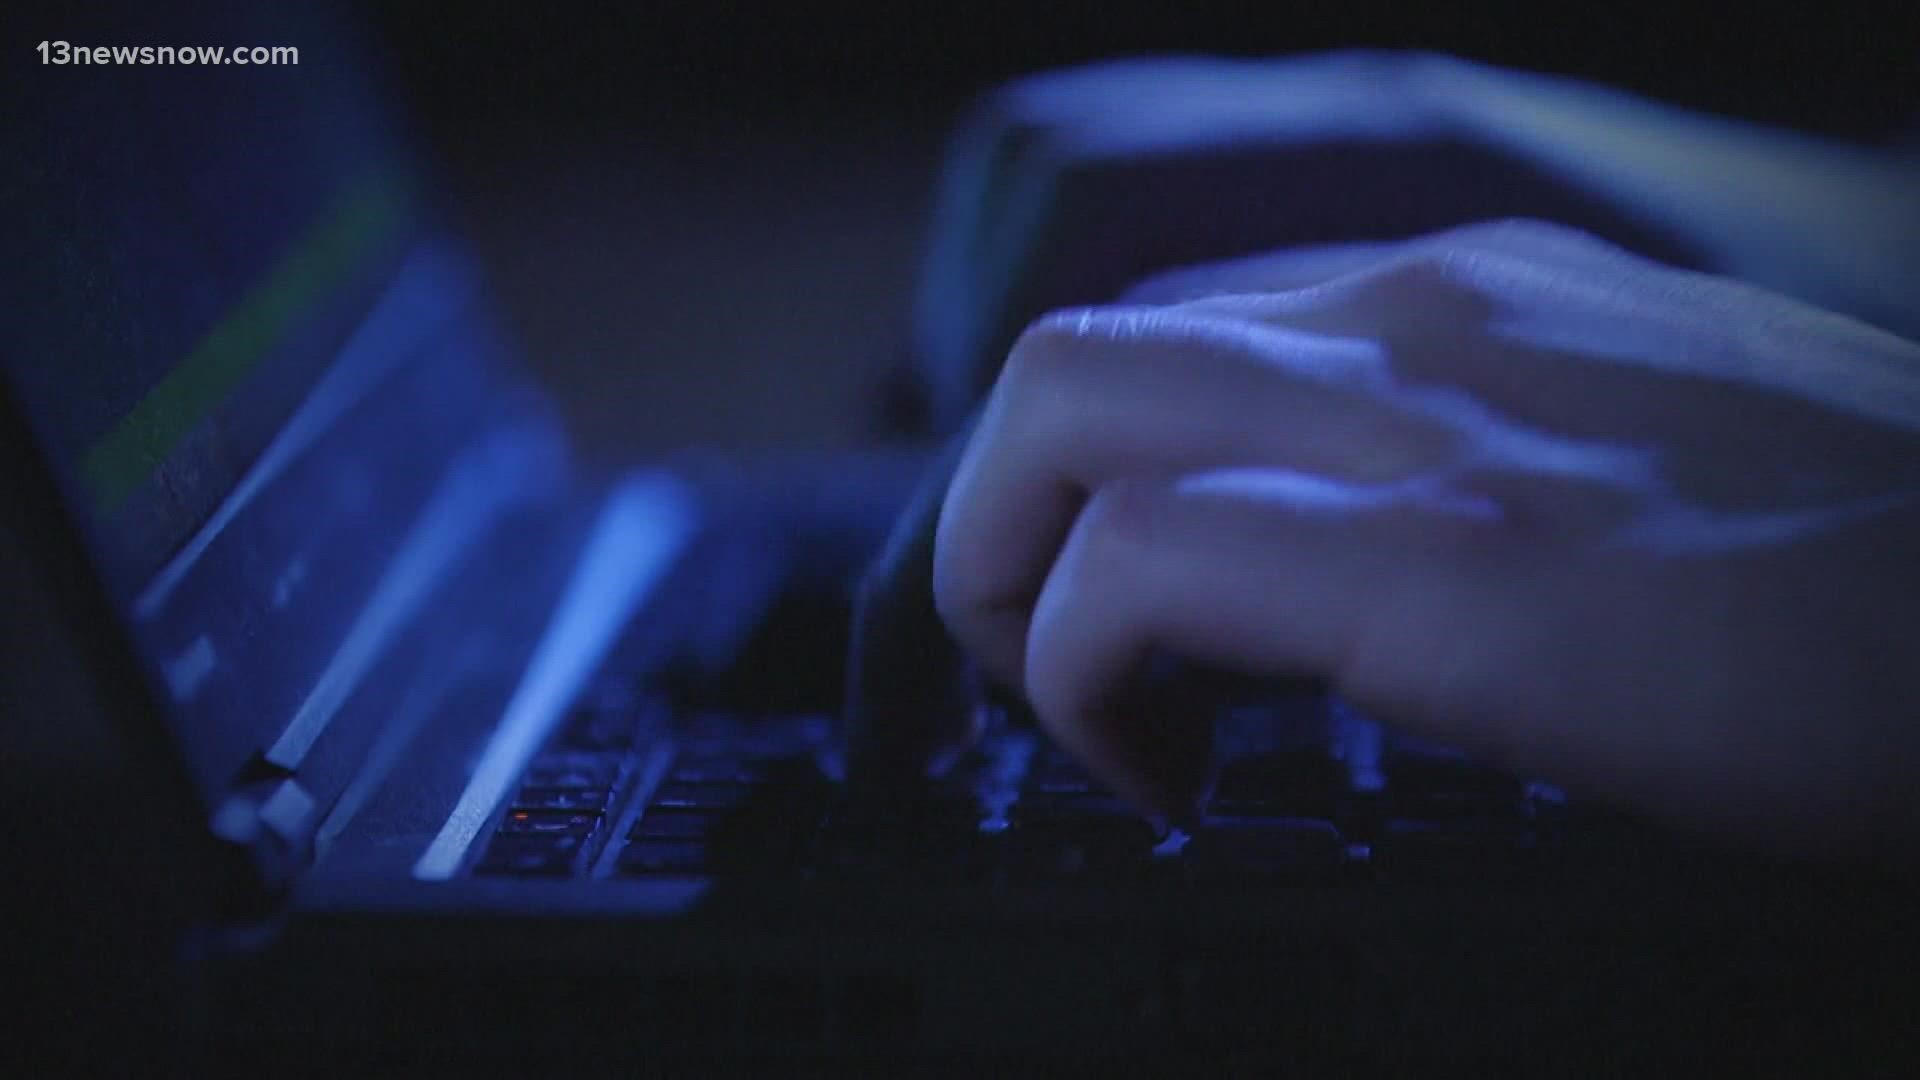 Hackers are trying to make out with your hard-earned money this holiday season. They're targeting small businesses. T